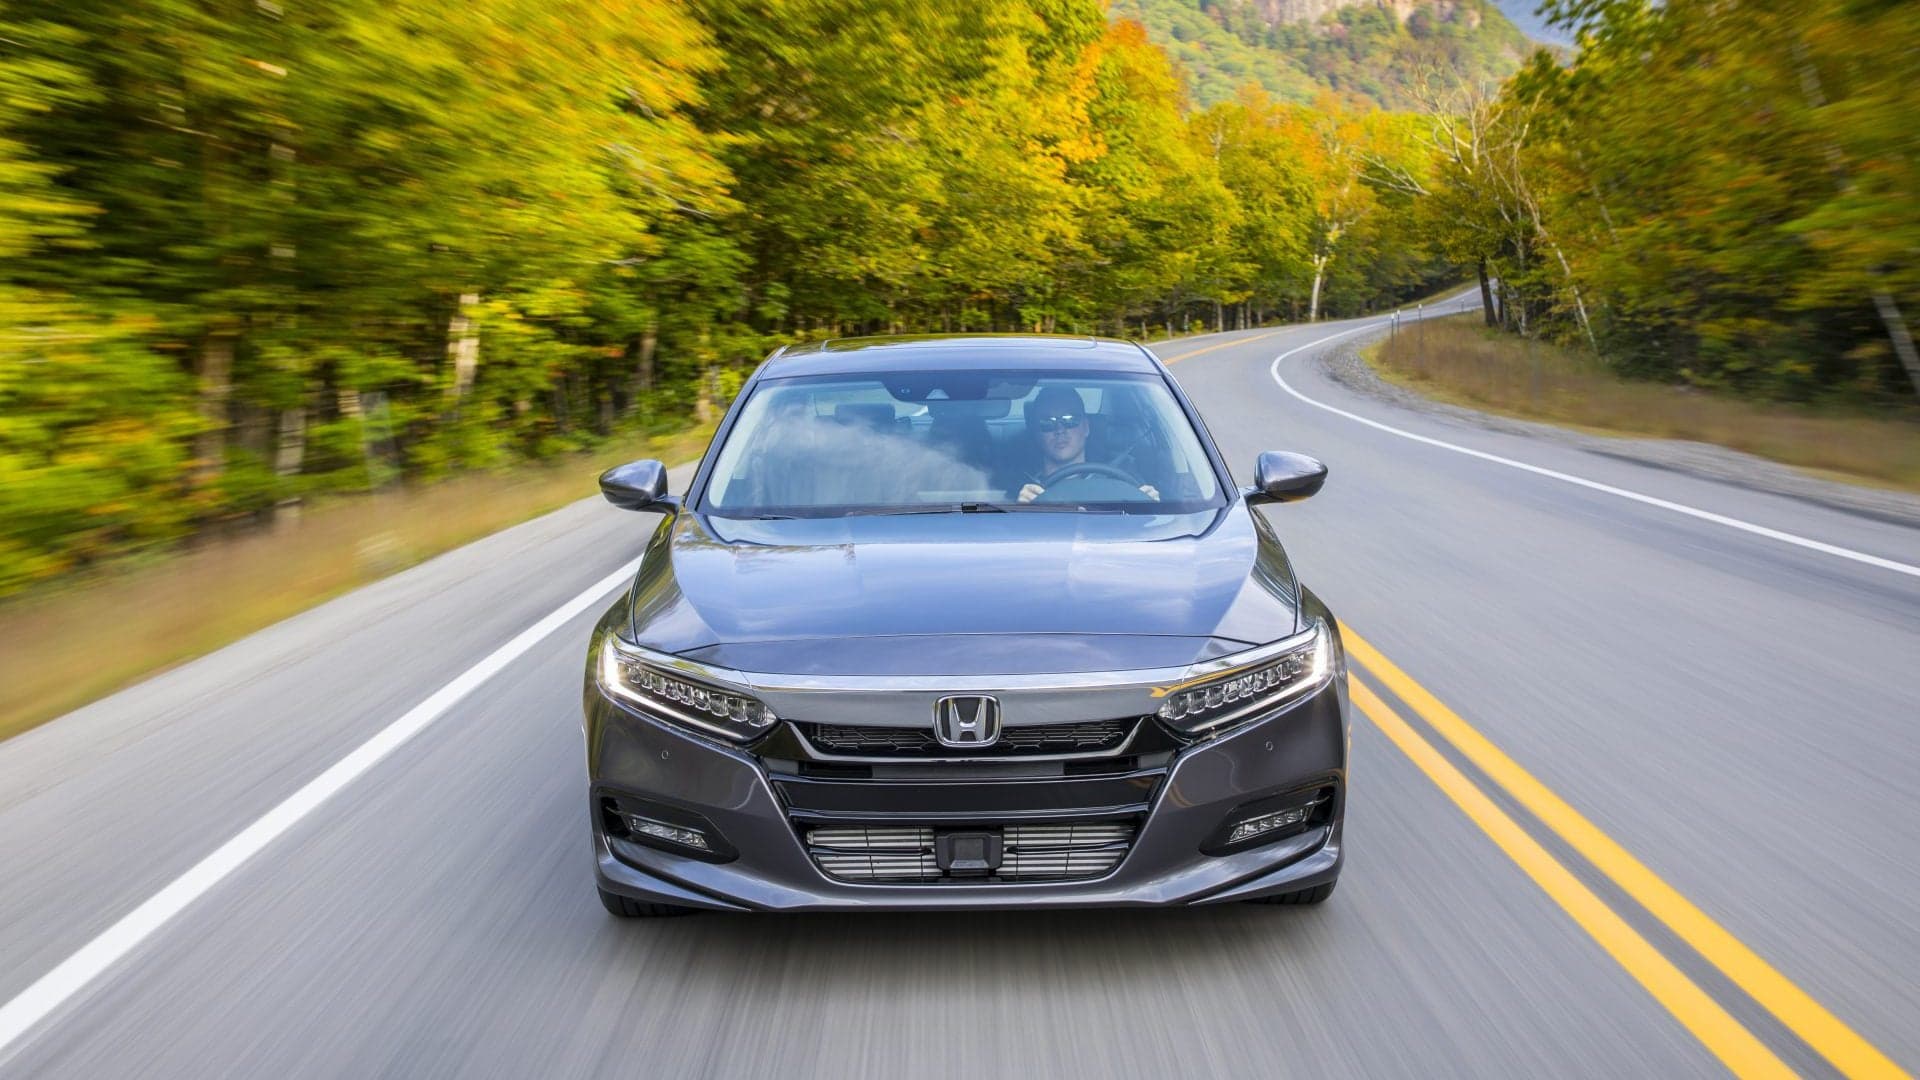 The 10 Cars Most Likely to Hit 200,000 Miles, According to Consumer Reports